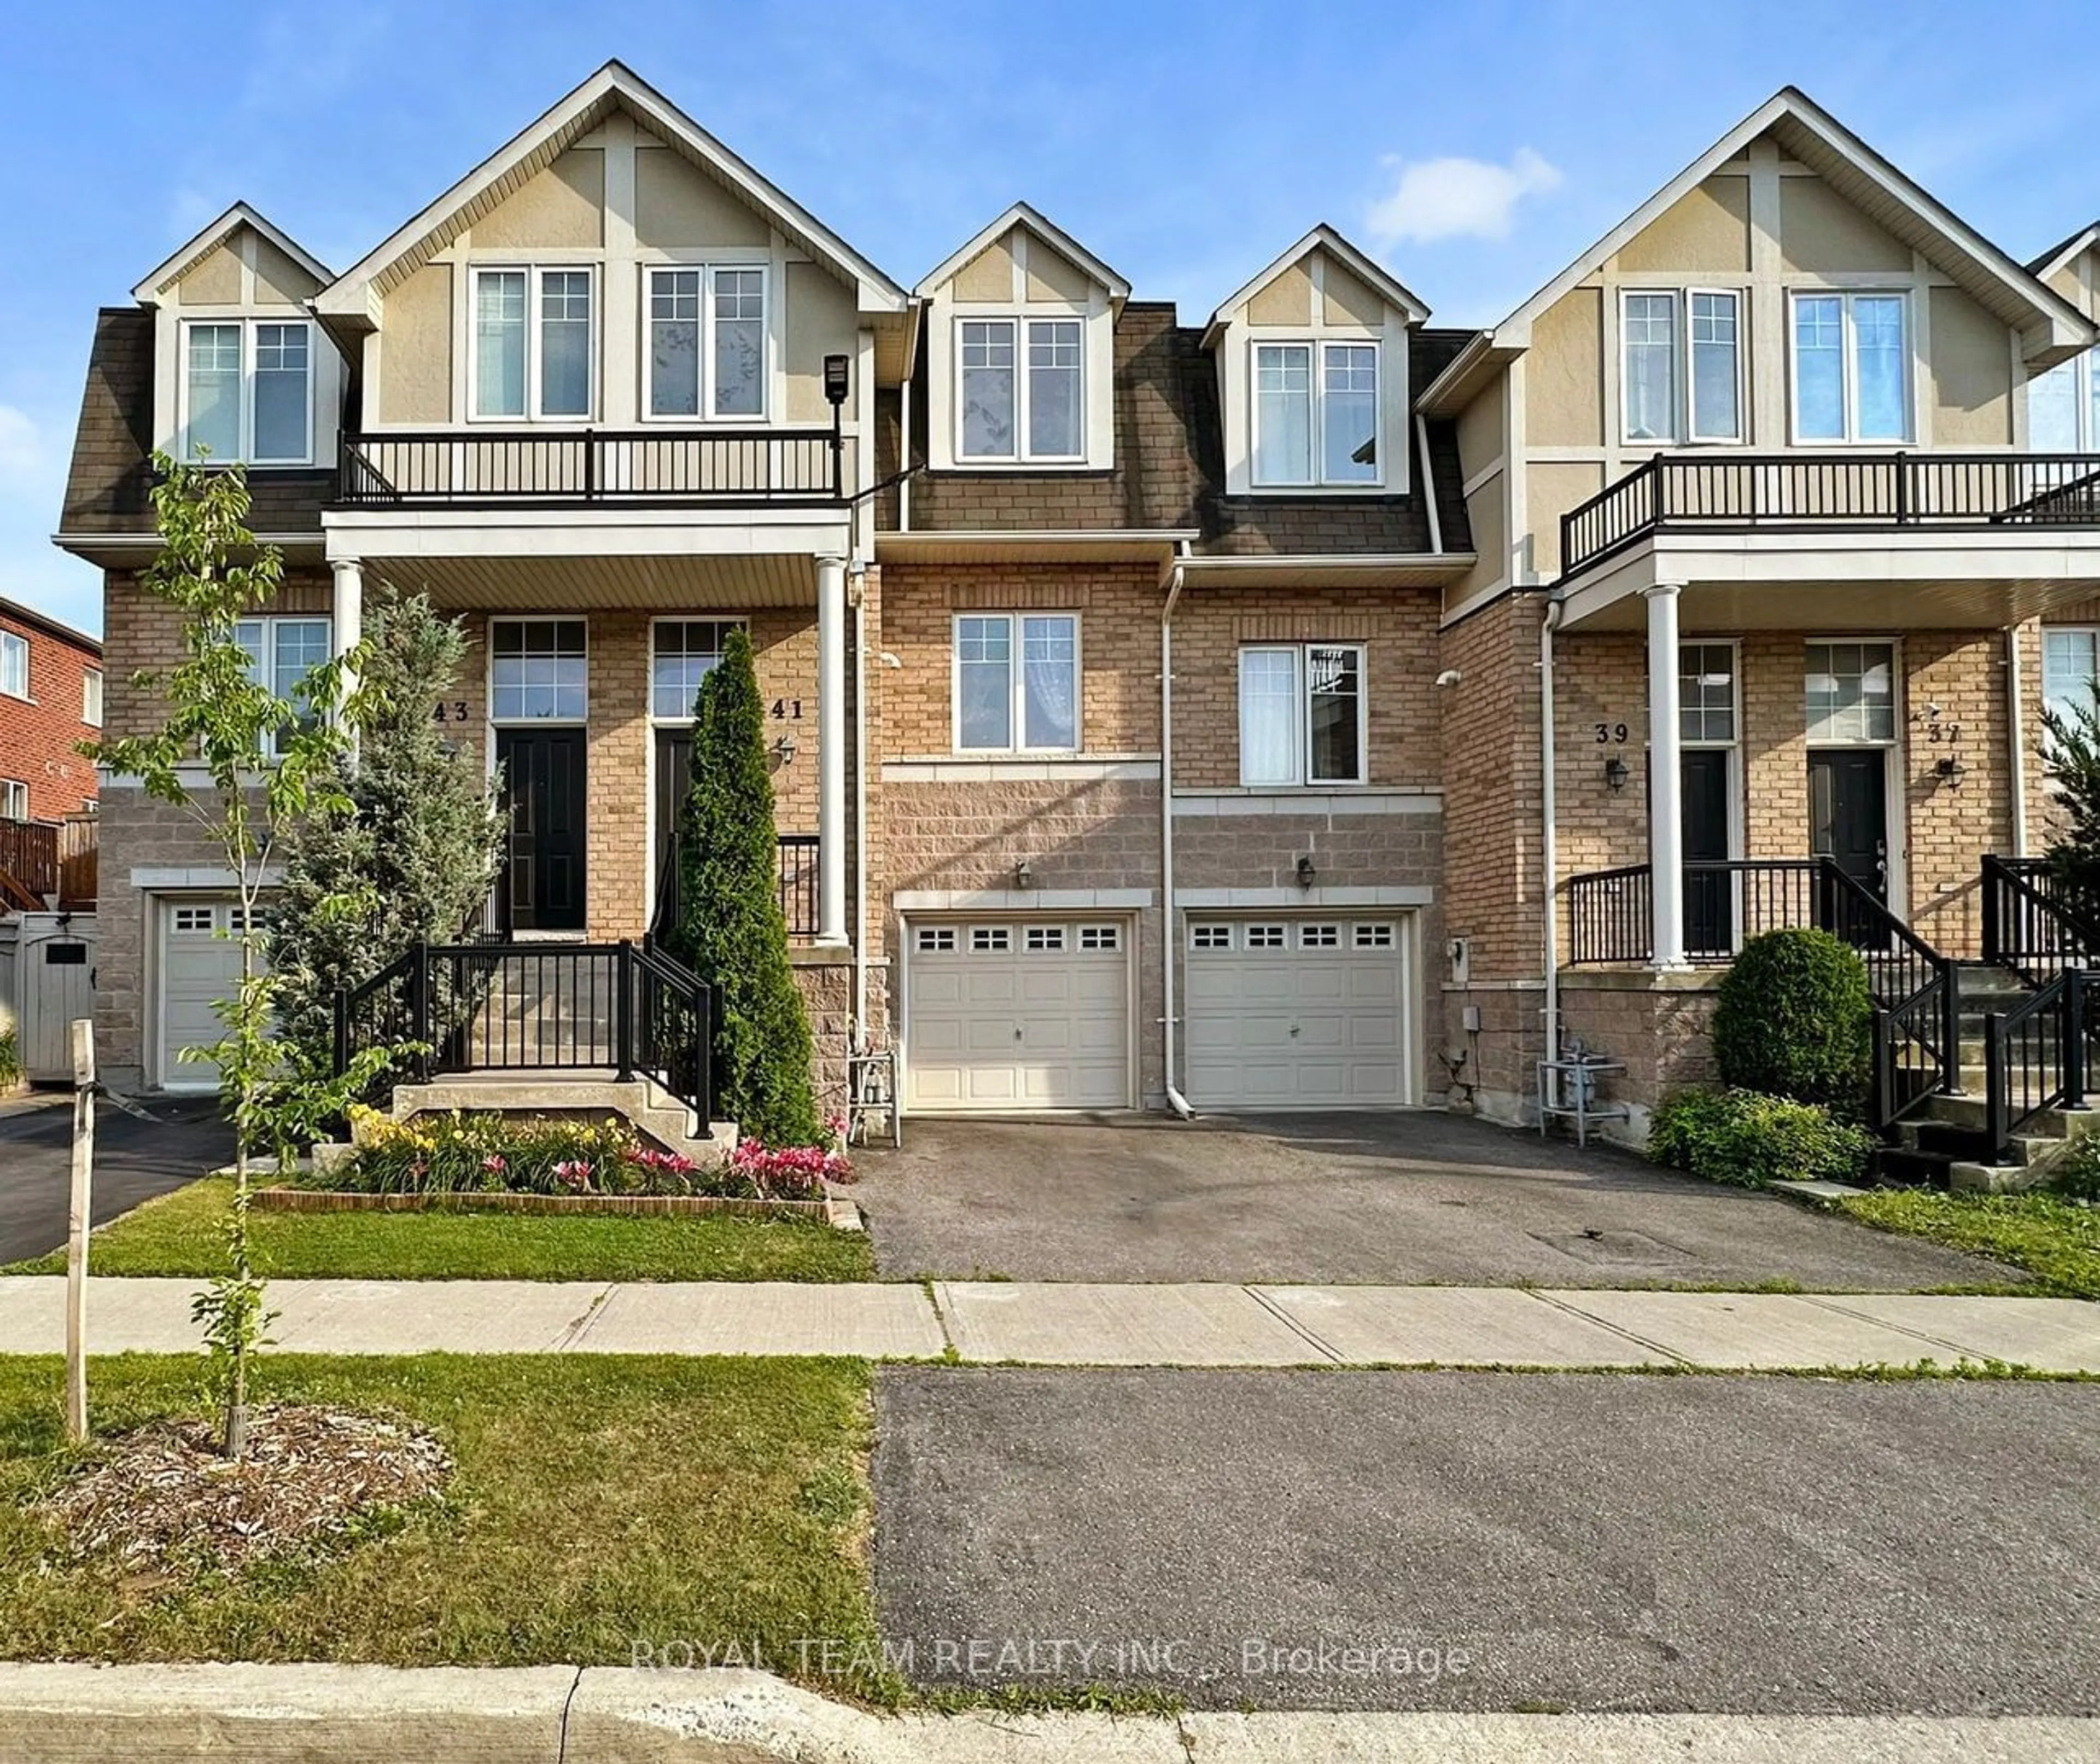 A pic from exterior of the house or condo for 41 Bell Estate Rd, Toronto Ontario M1L 0G5